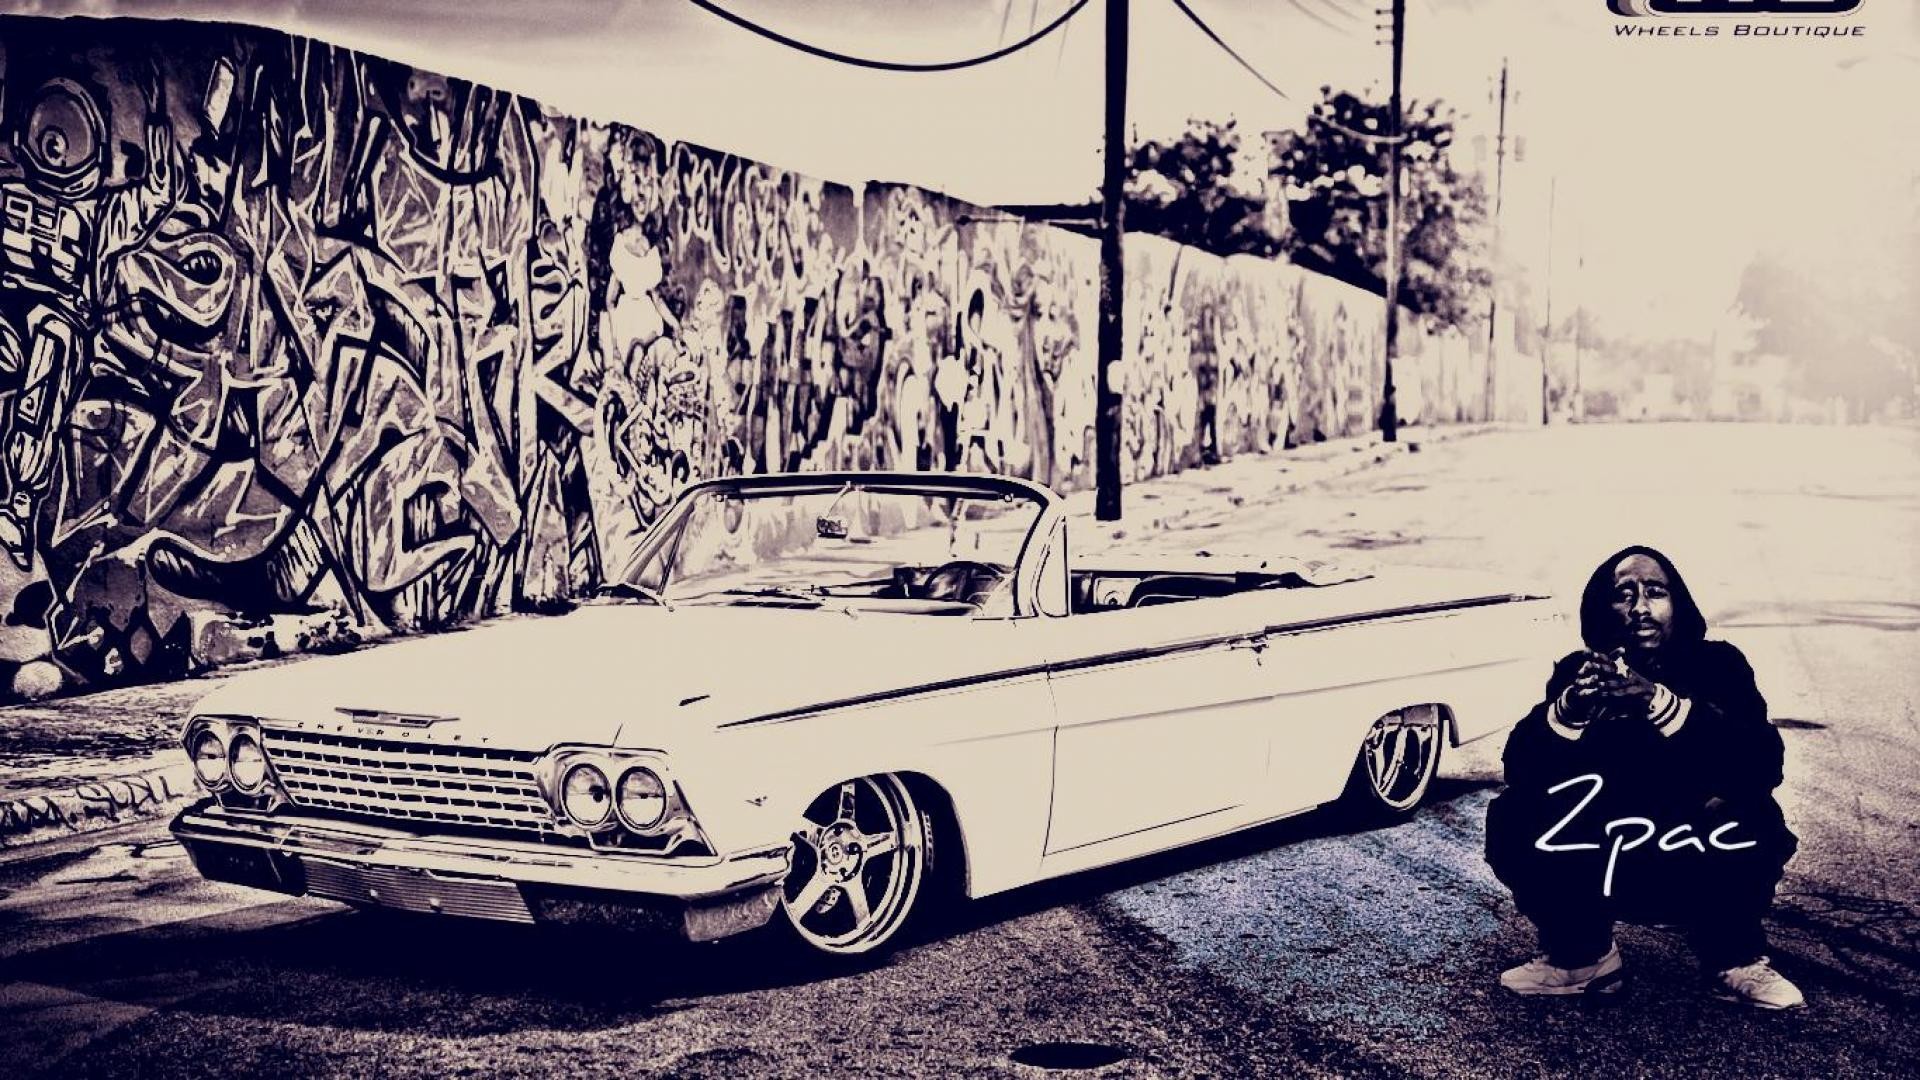 1920x1080 Lowrider background for your phone (iPhone & android), computer or .